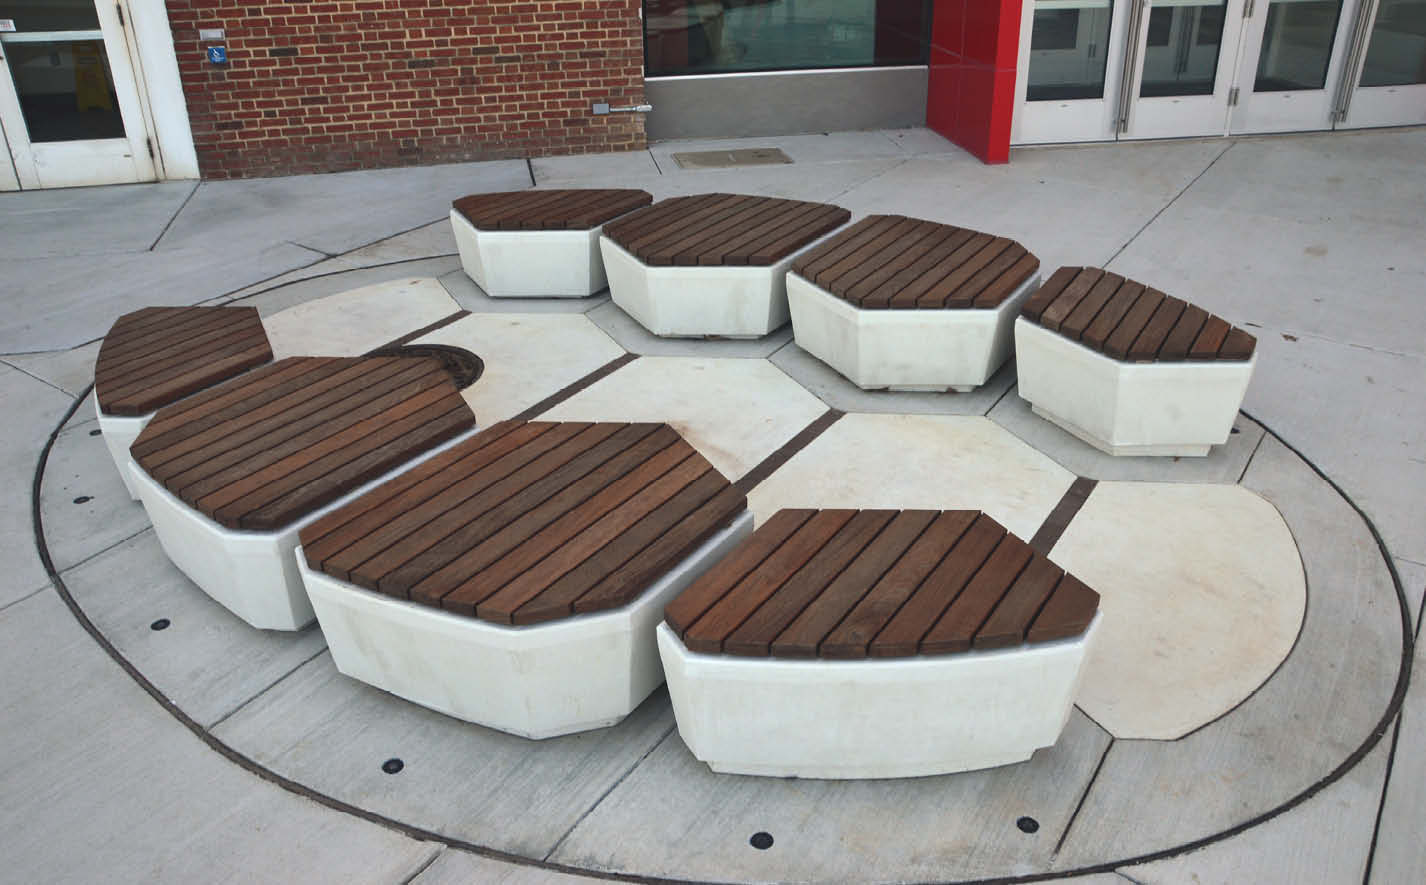 Art imitating nature, this concrete bench looks like a turtle shell.